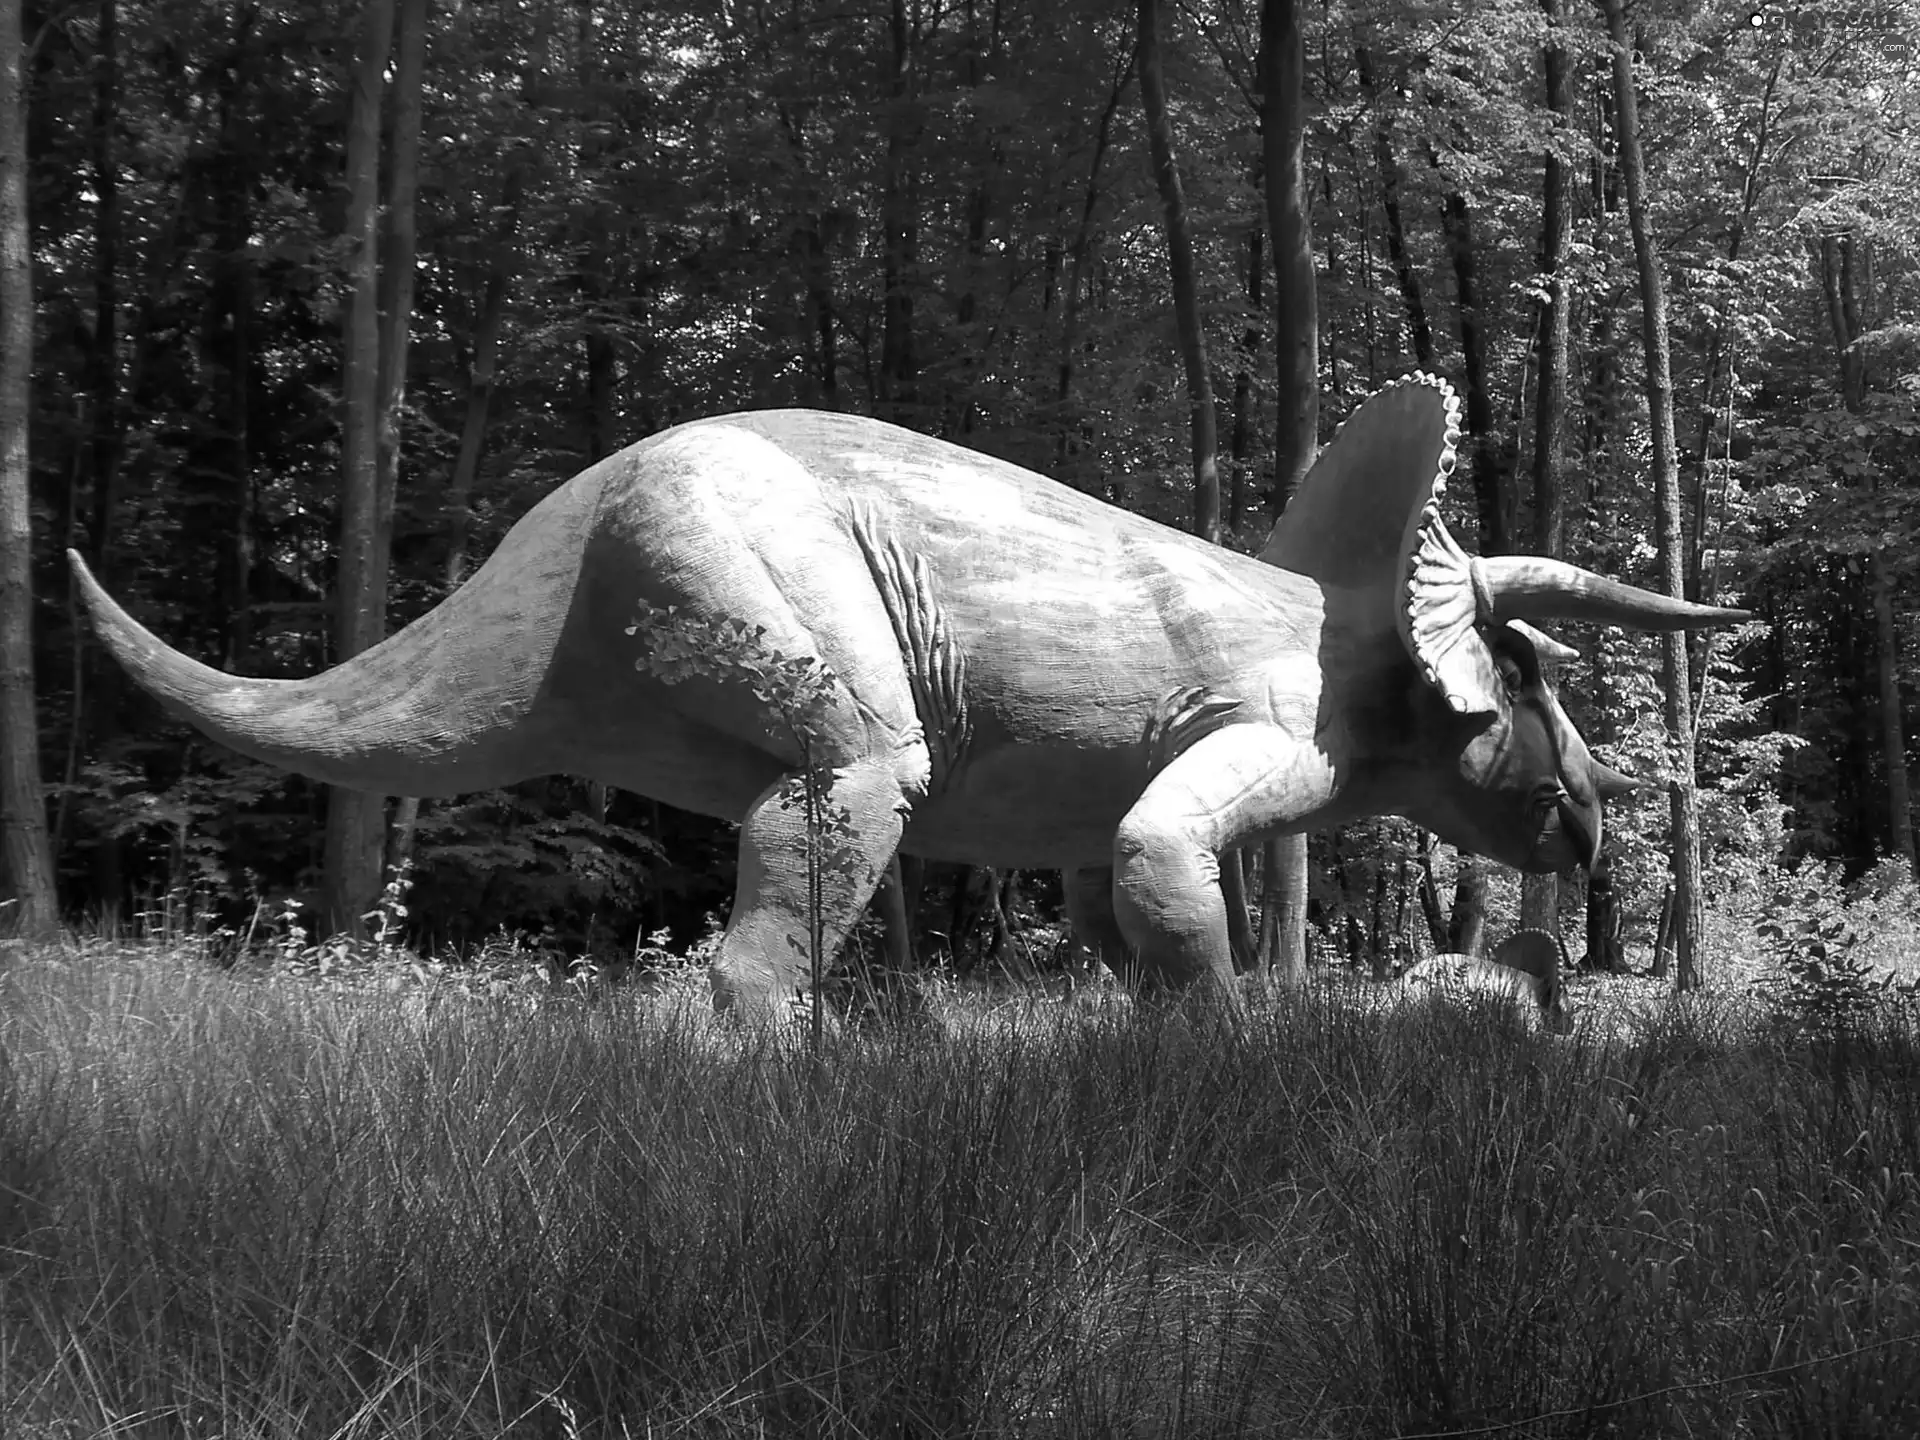 grass, Triceratops, forest